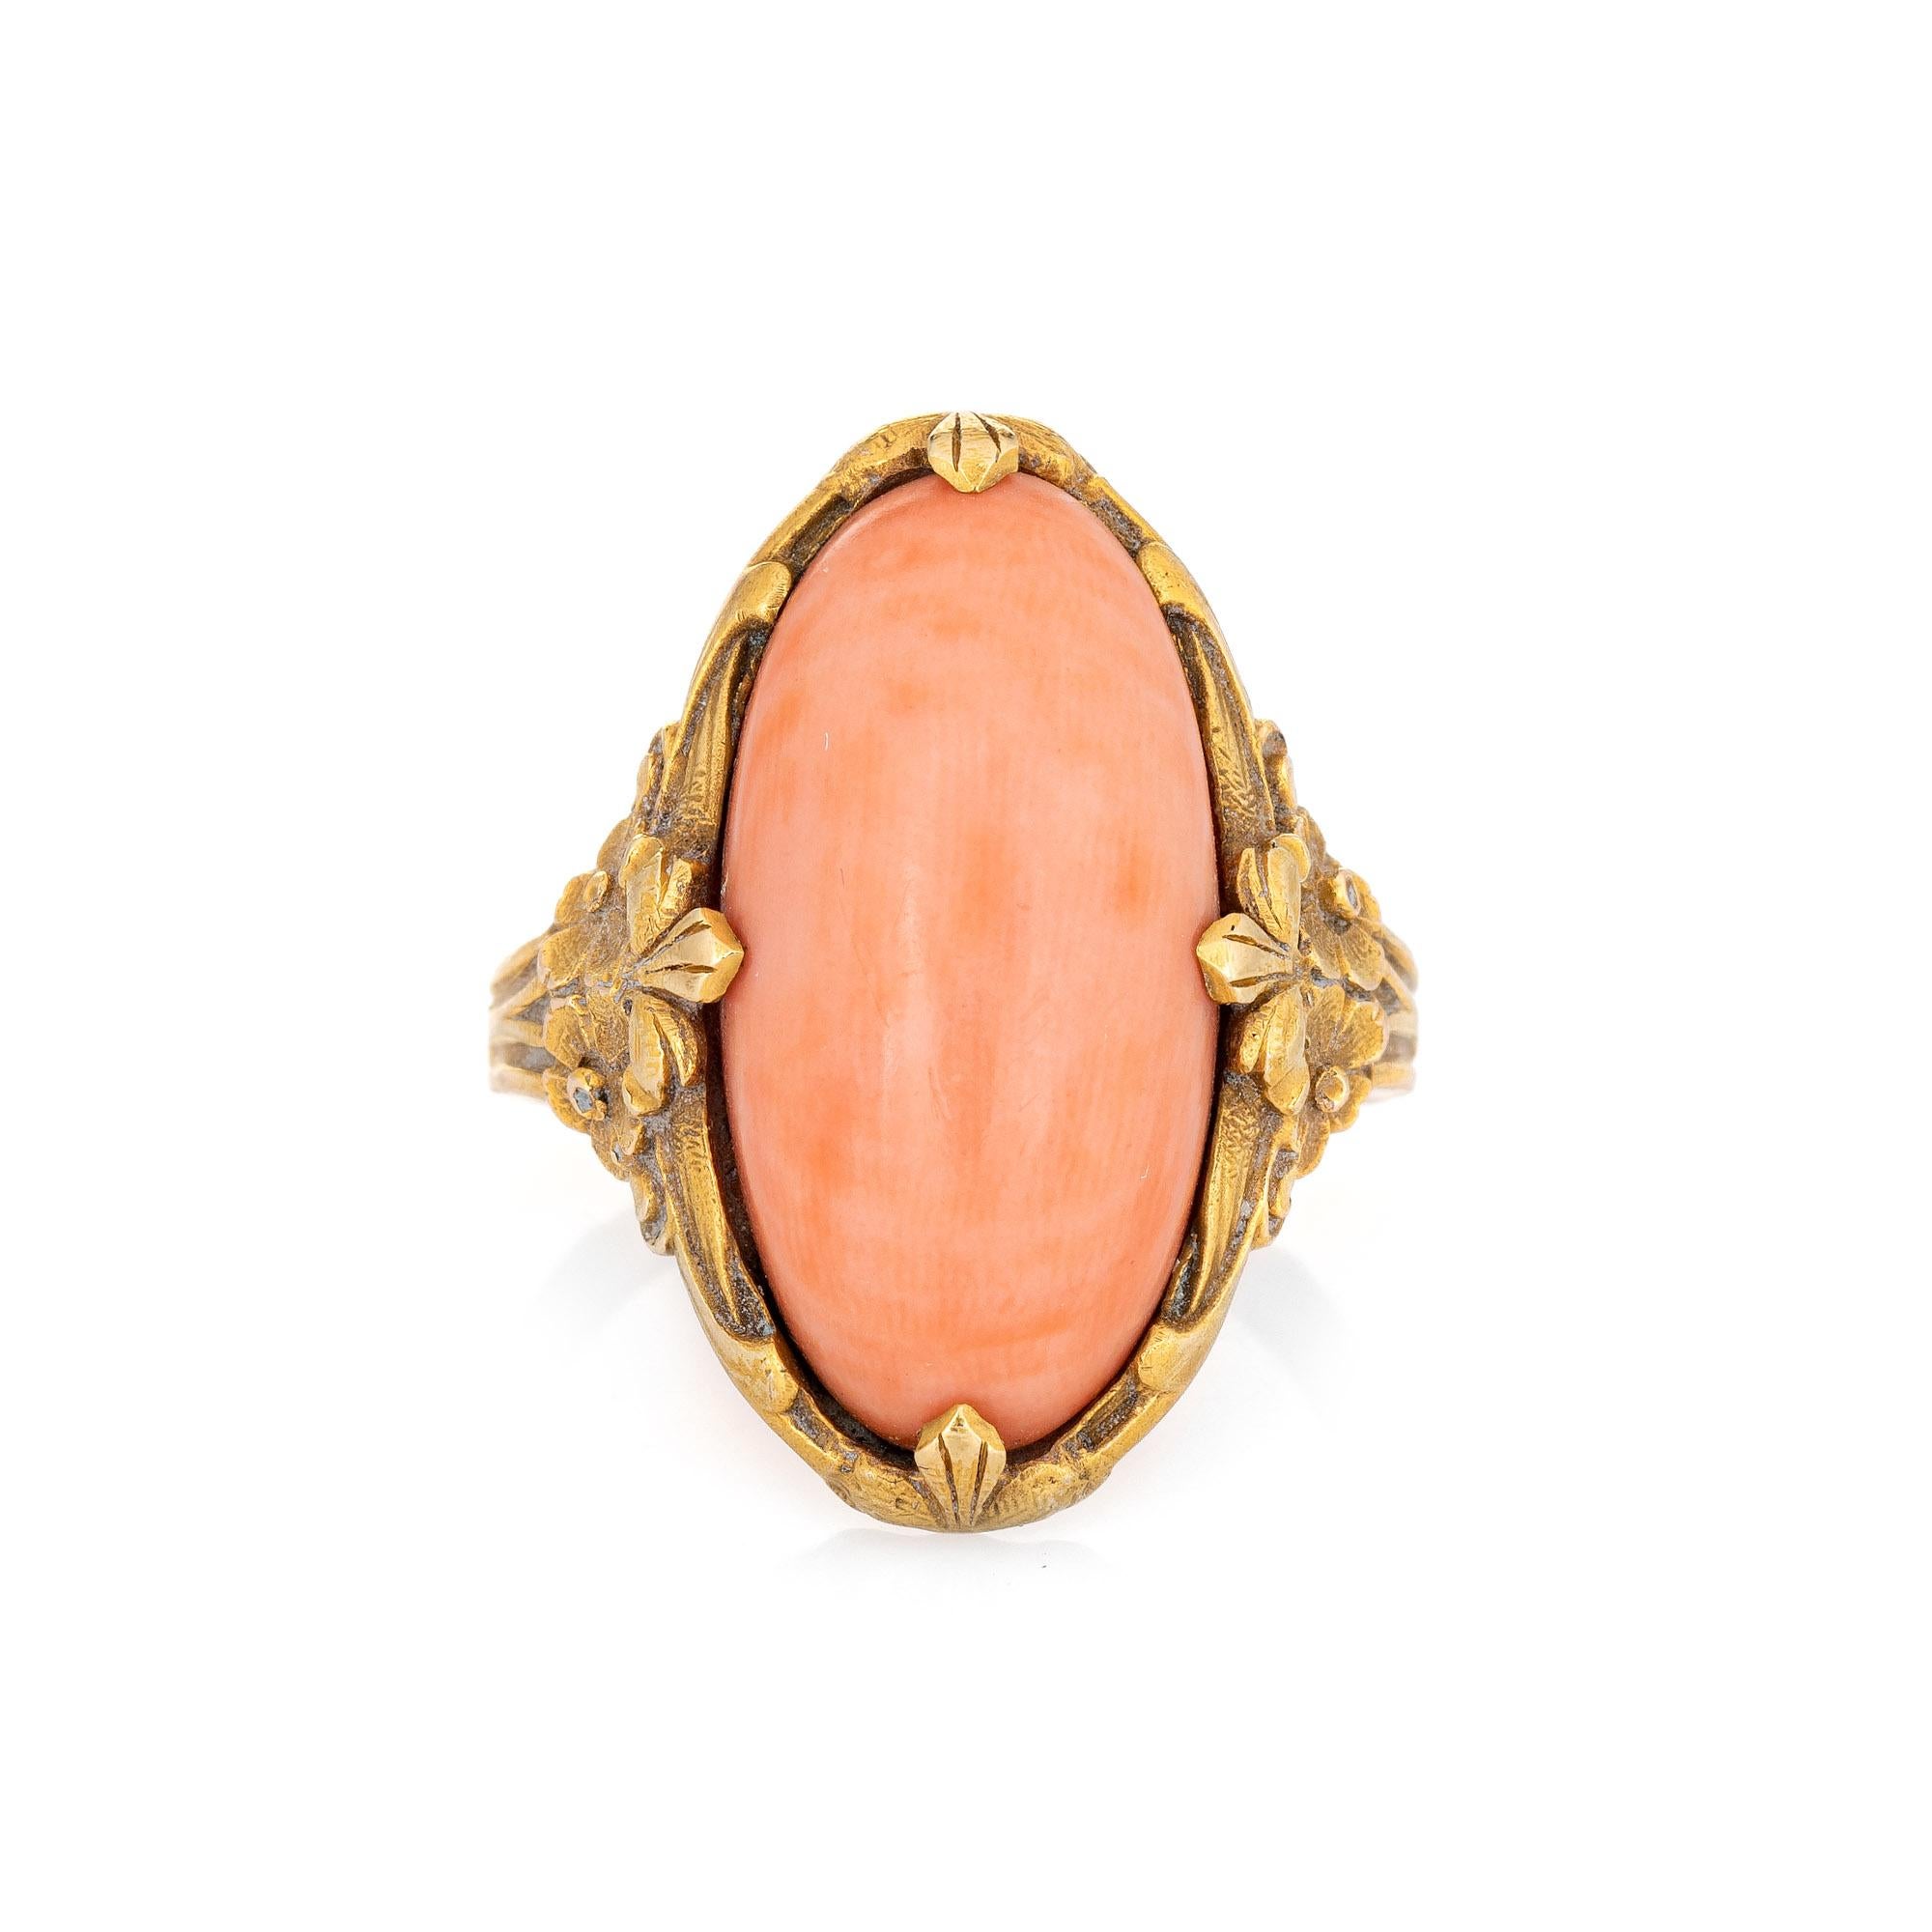 Stylish antique Art Nouveau era coral ring (circa 1910s) crafted in 14 karat yellow gold. 

Cabochon cut coral measures 18.5mm x 9.5mm. The coral is in very good condition and free of cracks or chips (light surface abrasions visible under a 10x